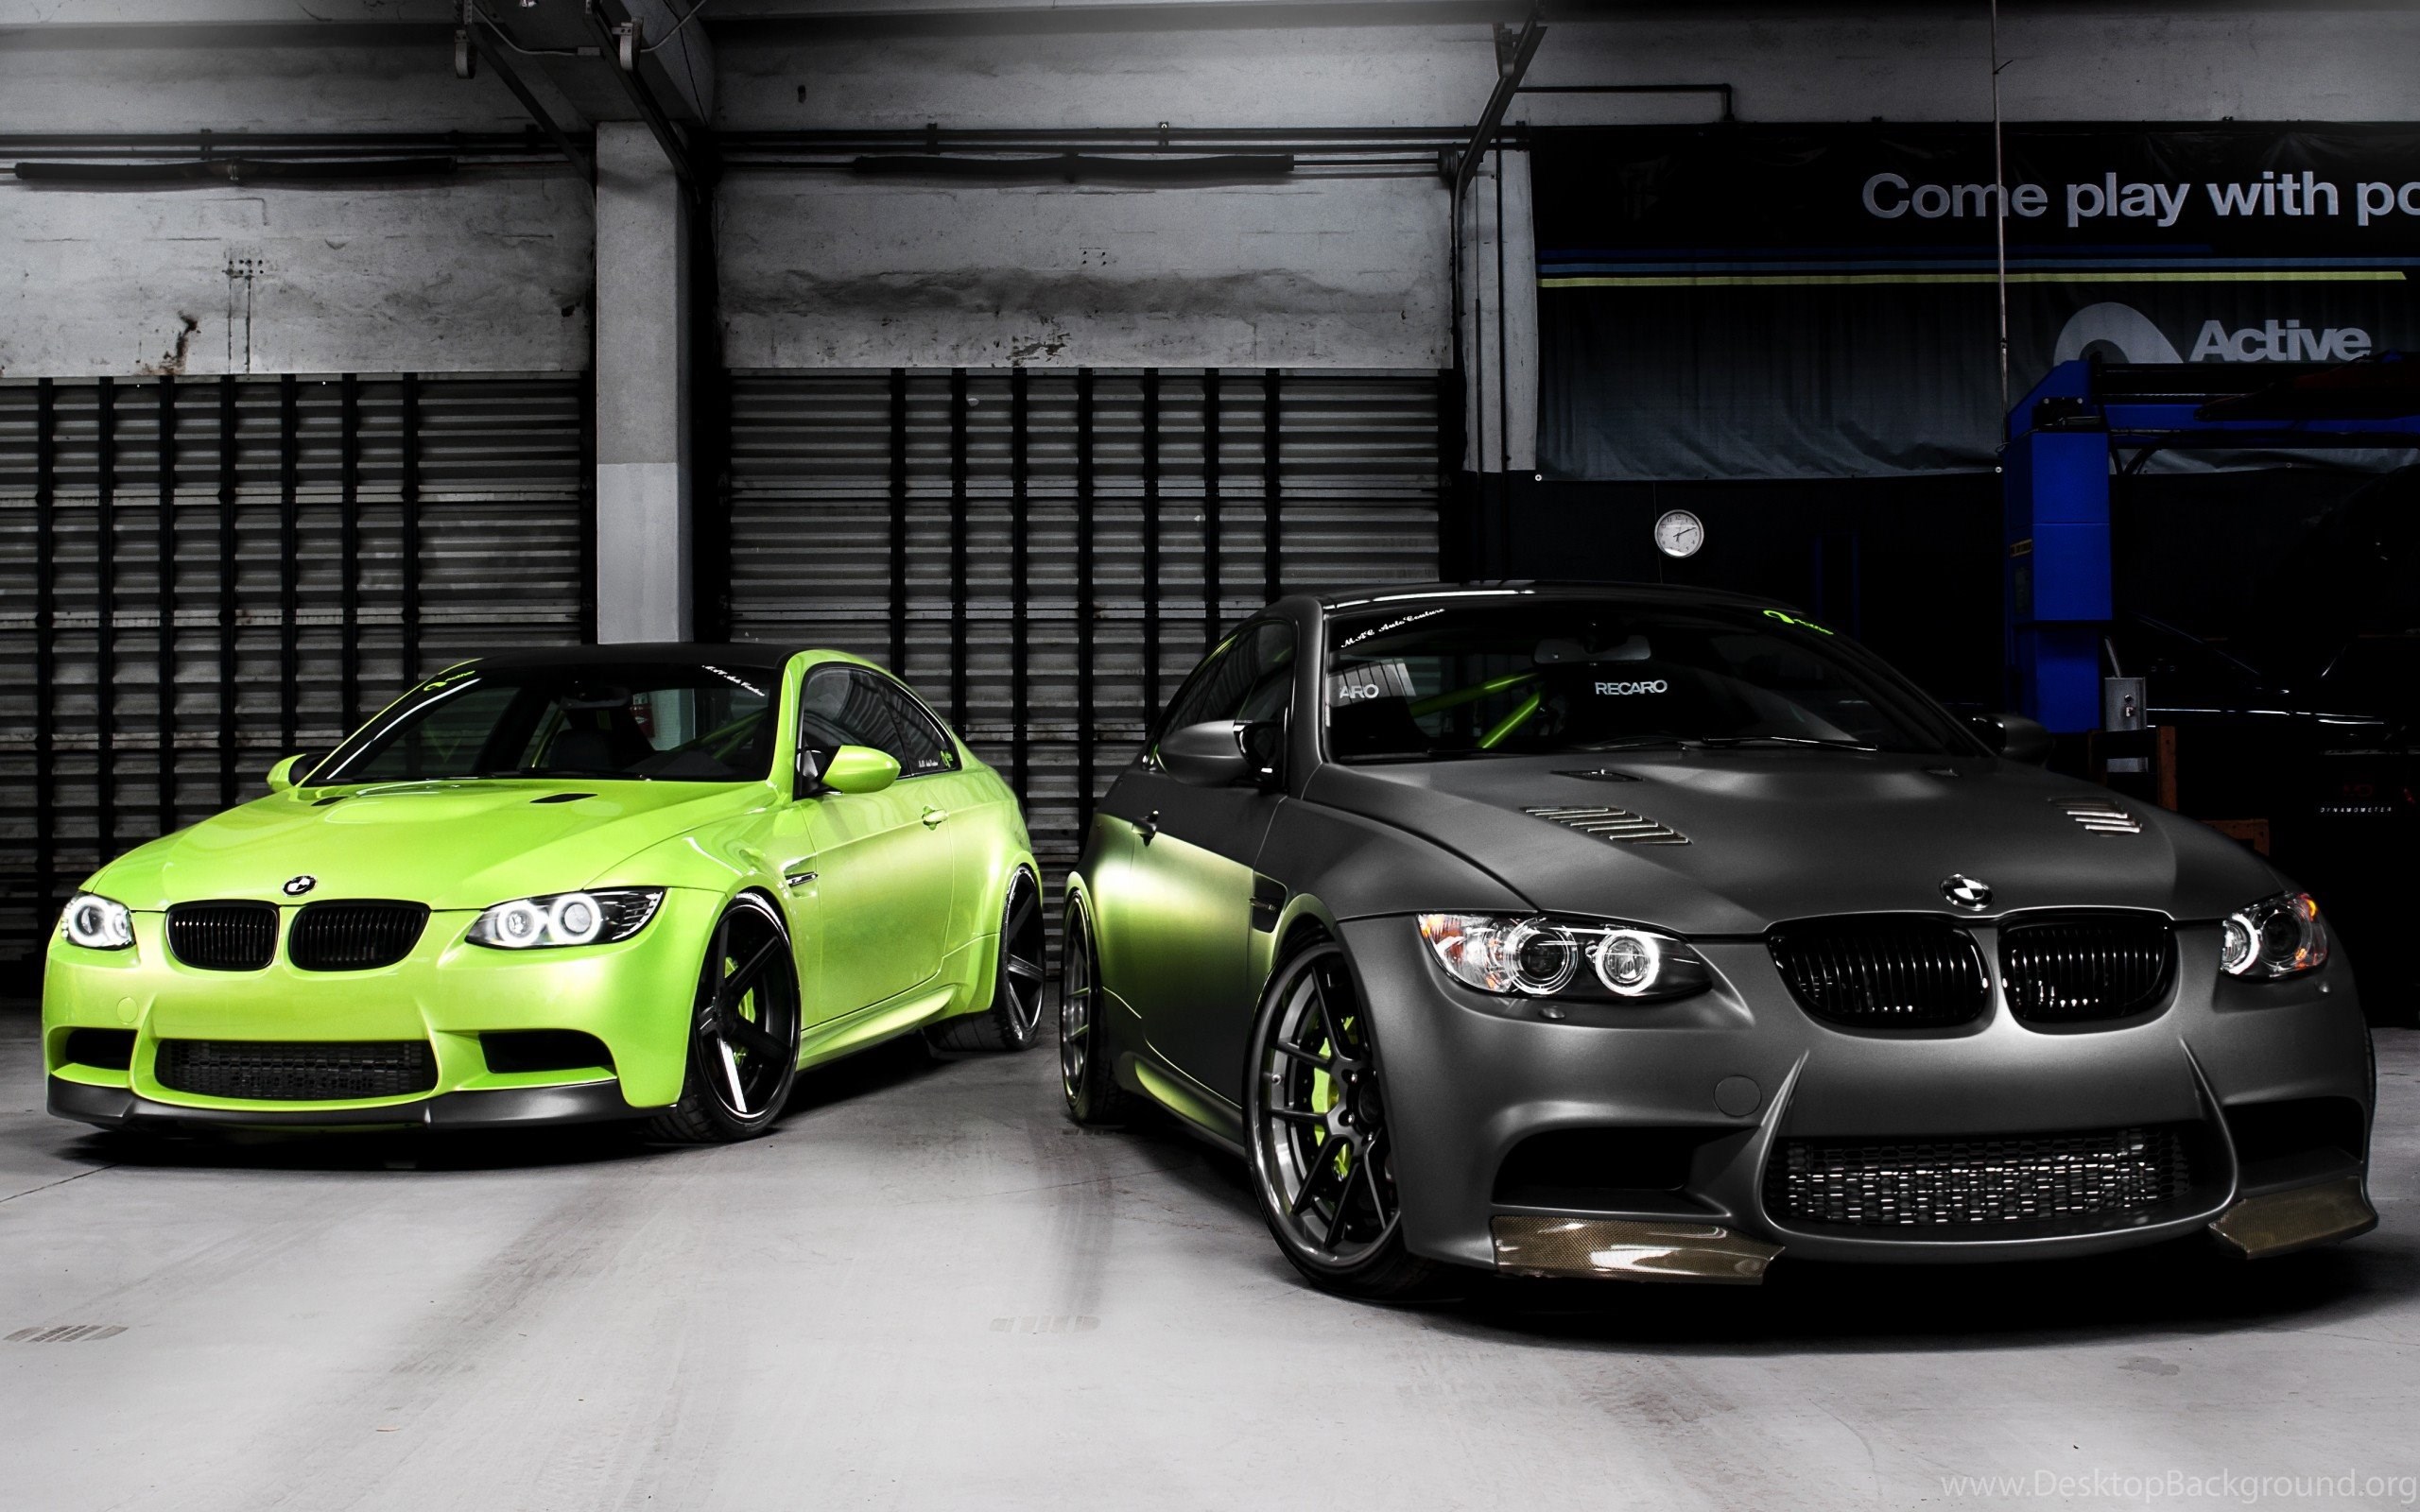 Download The Black And Green BMW Wallpaper, Black And Green BMW. Desktop Background